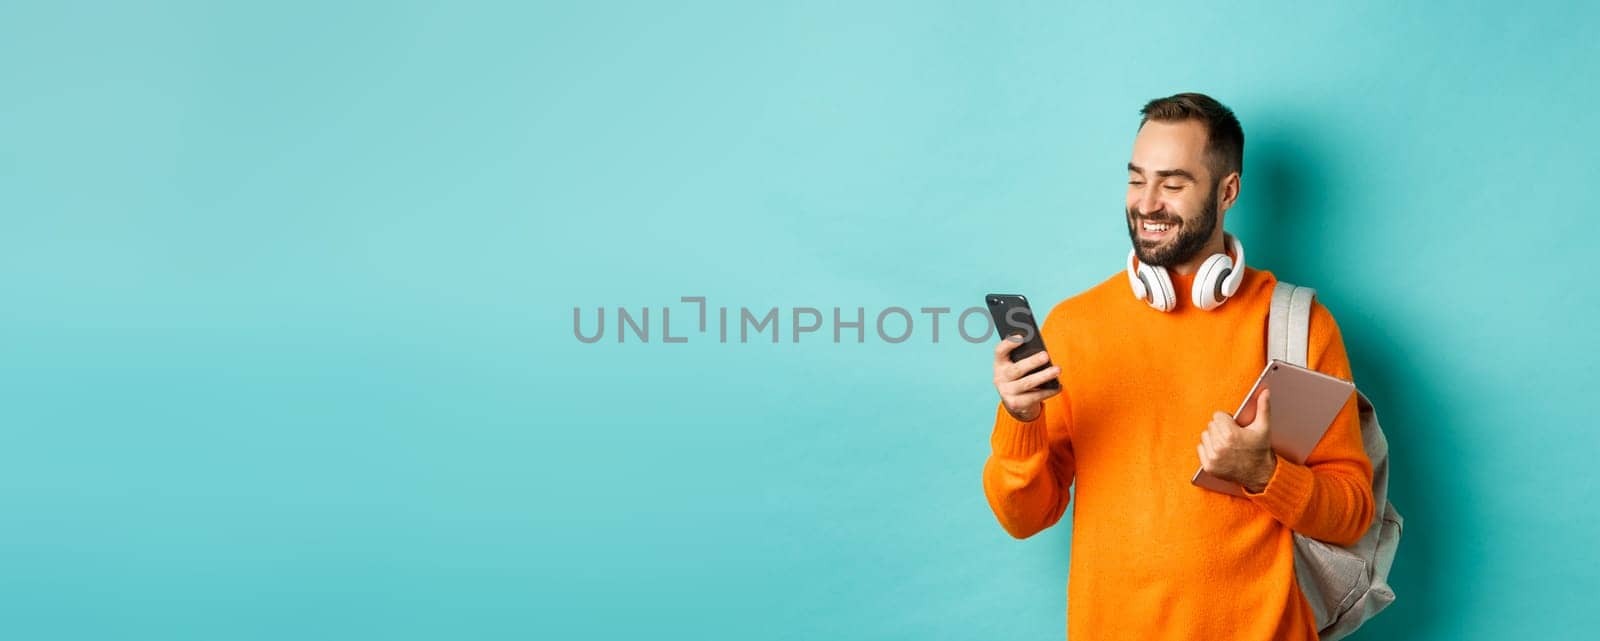 Handsome man student with headphones and backpack, holding digital tablet, reading message on mobile phone, standing against light blue background.